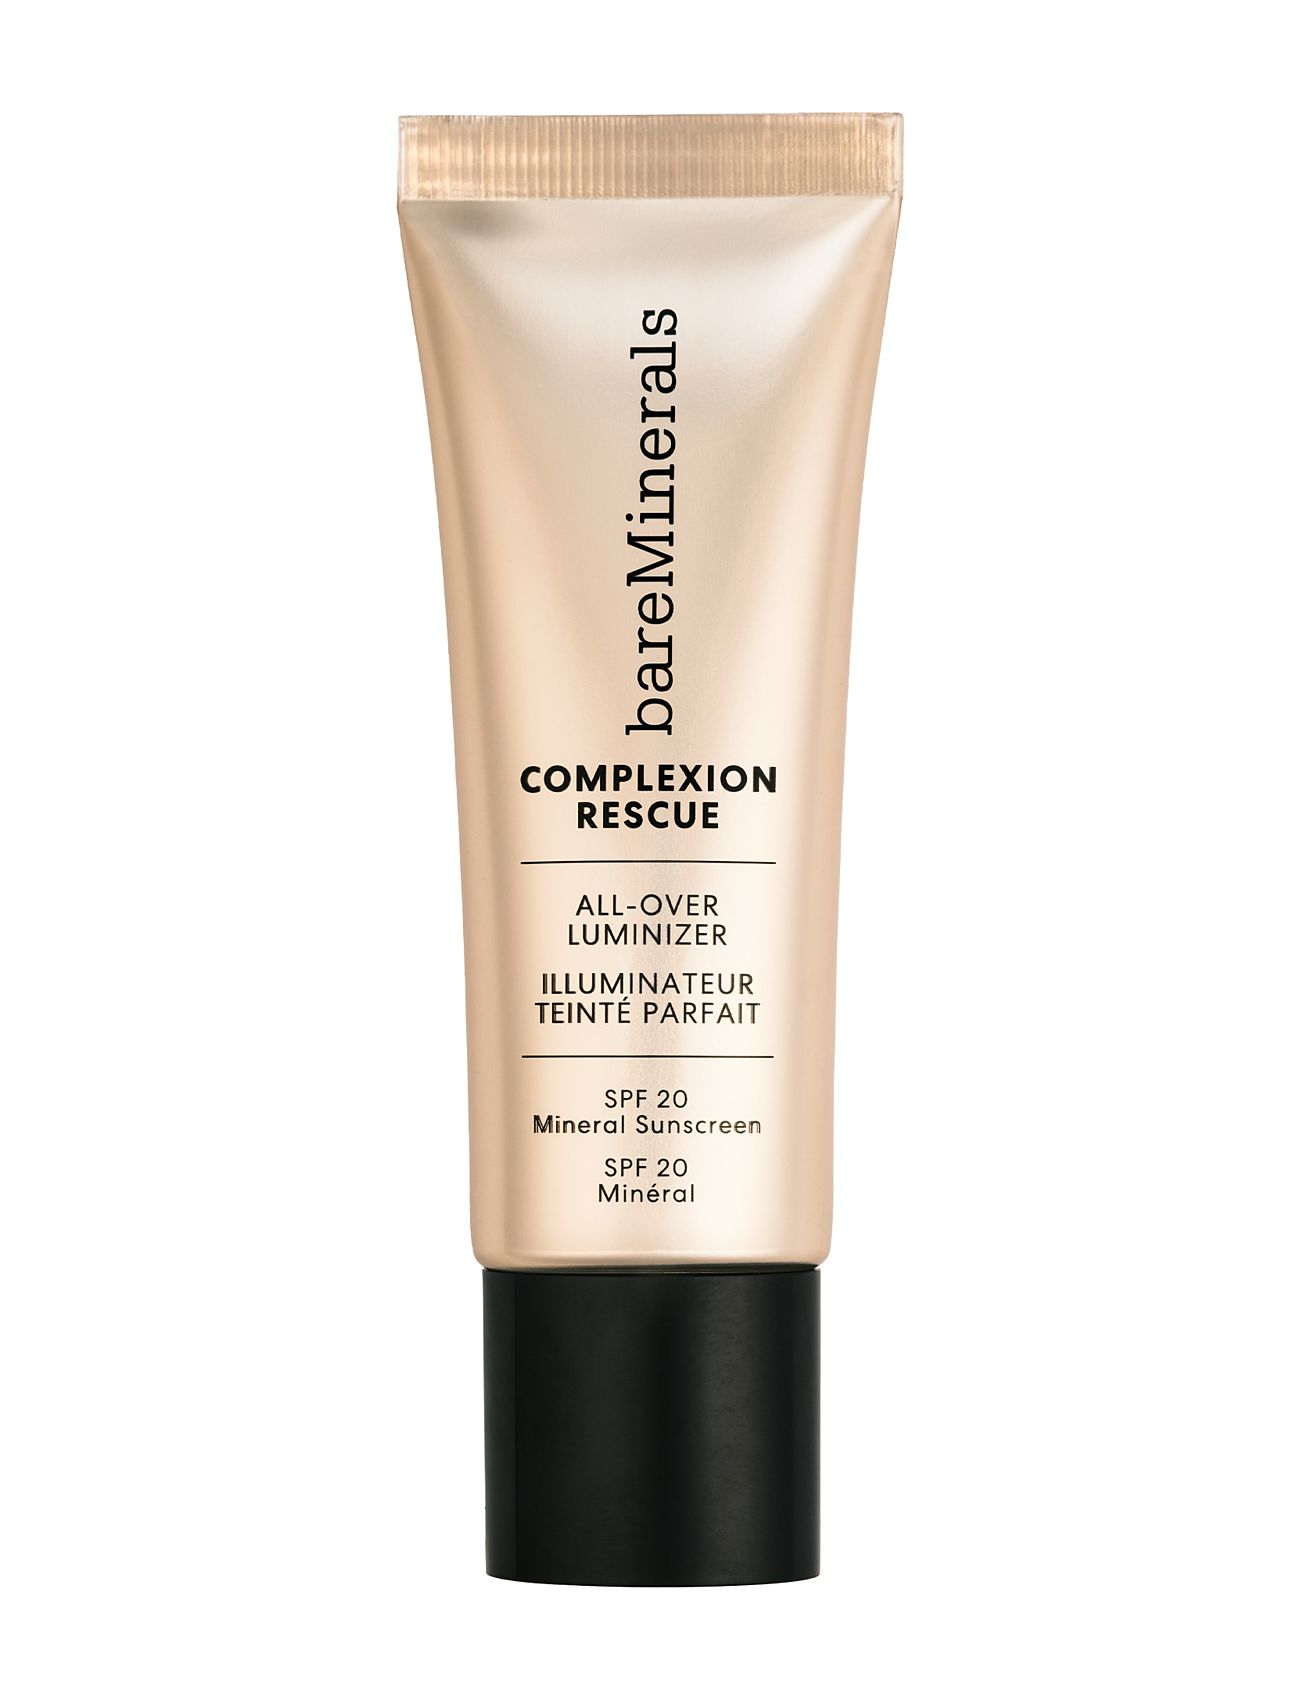 Complexion Rescue All Over Luminizer Champagne​ 03 Bronzer Solpudder Nude BareMinerals